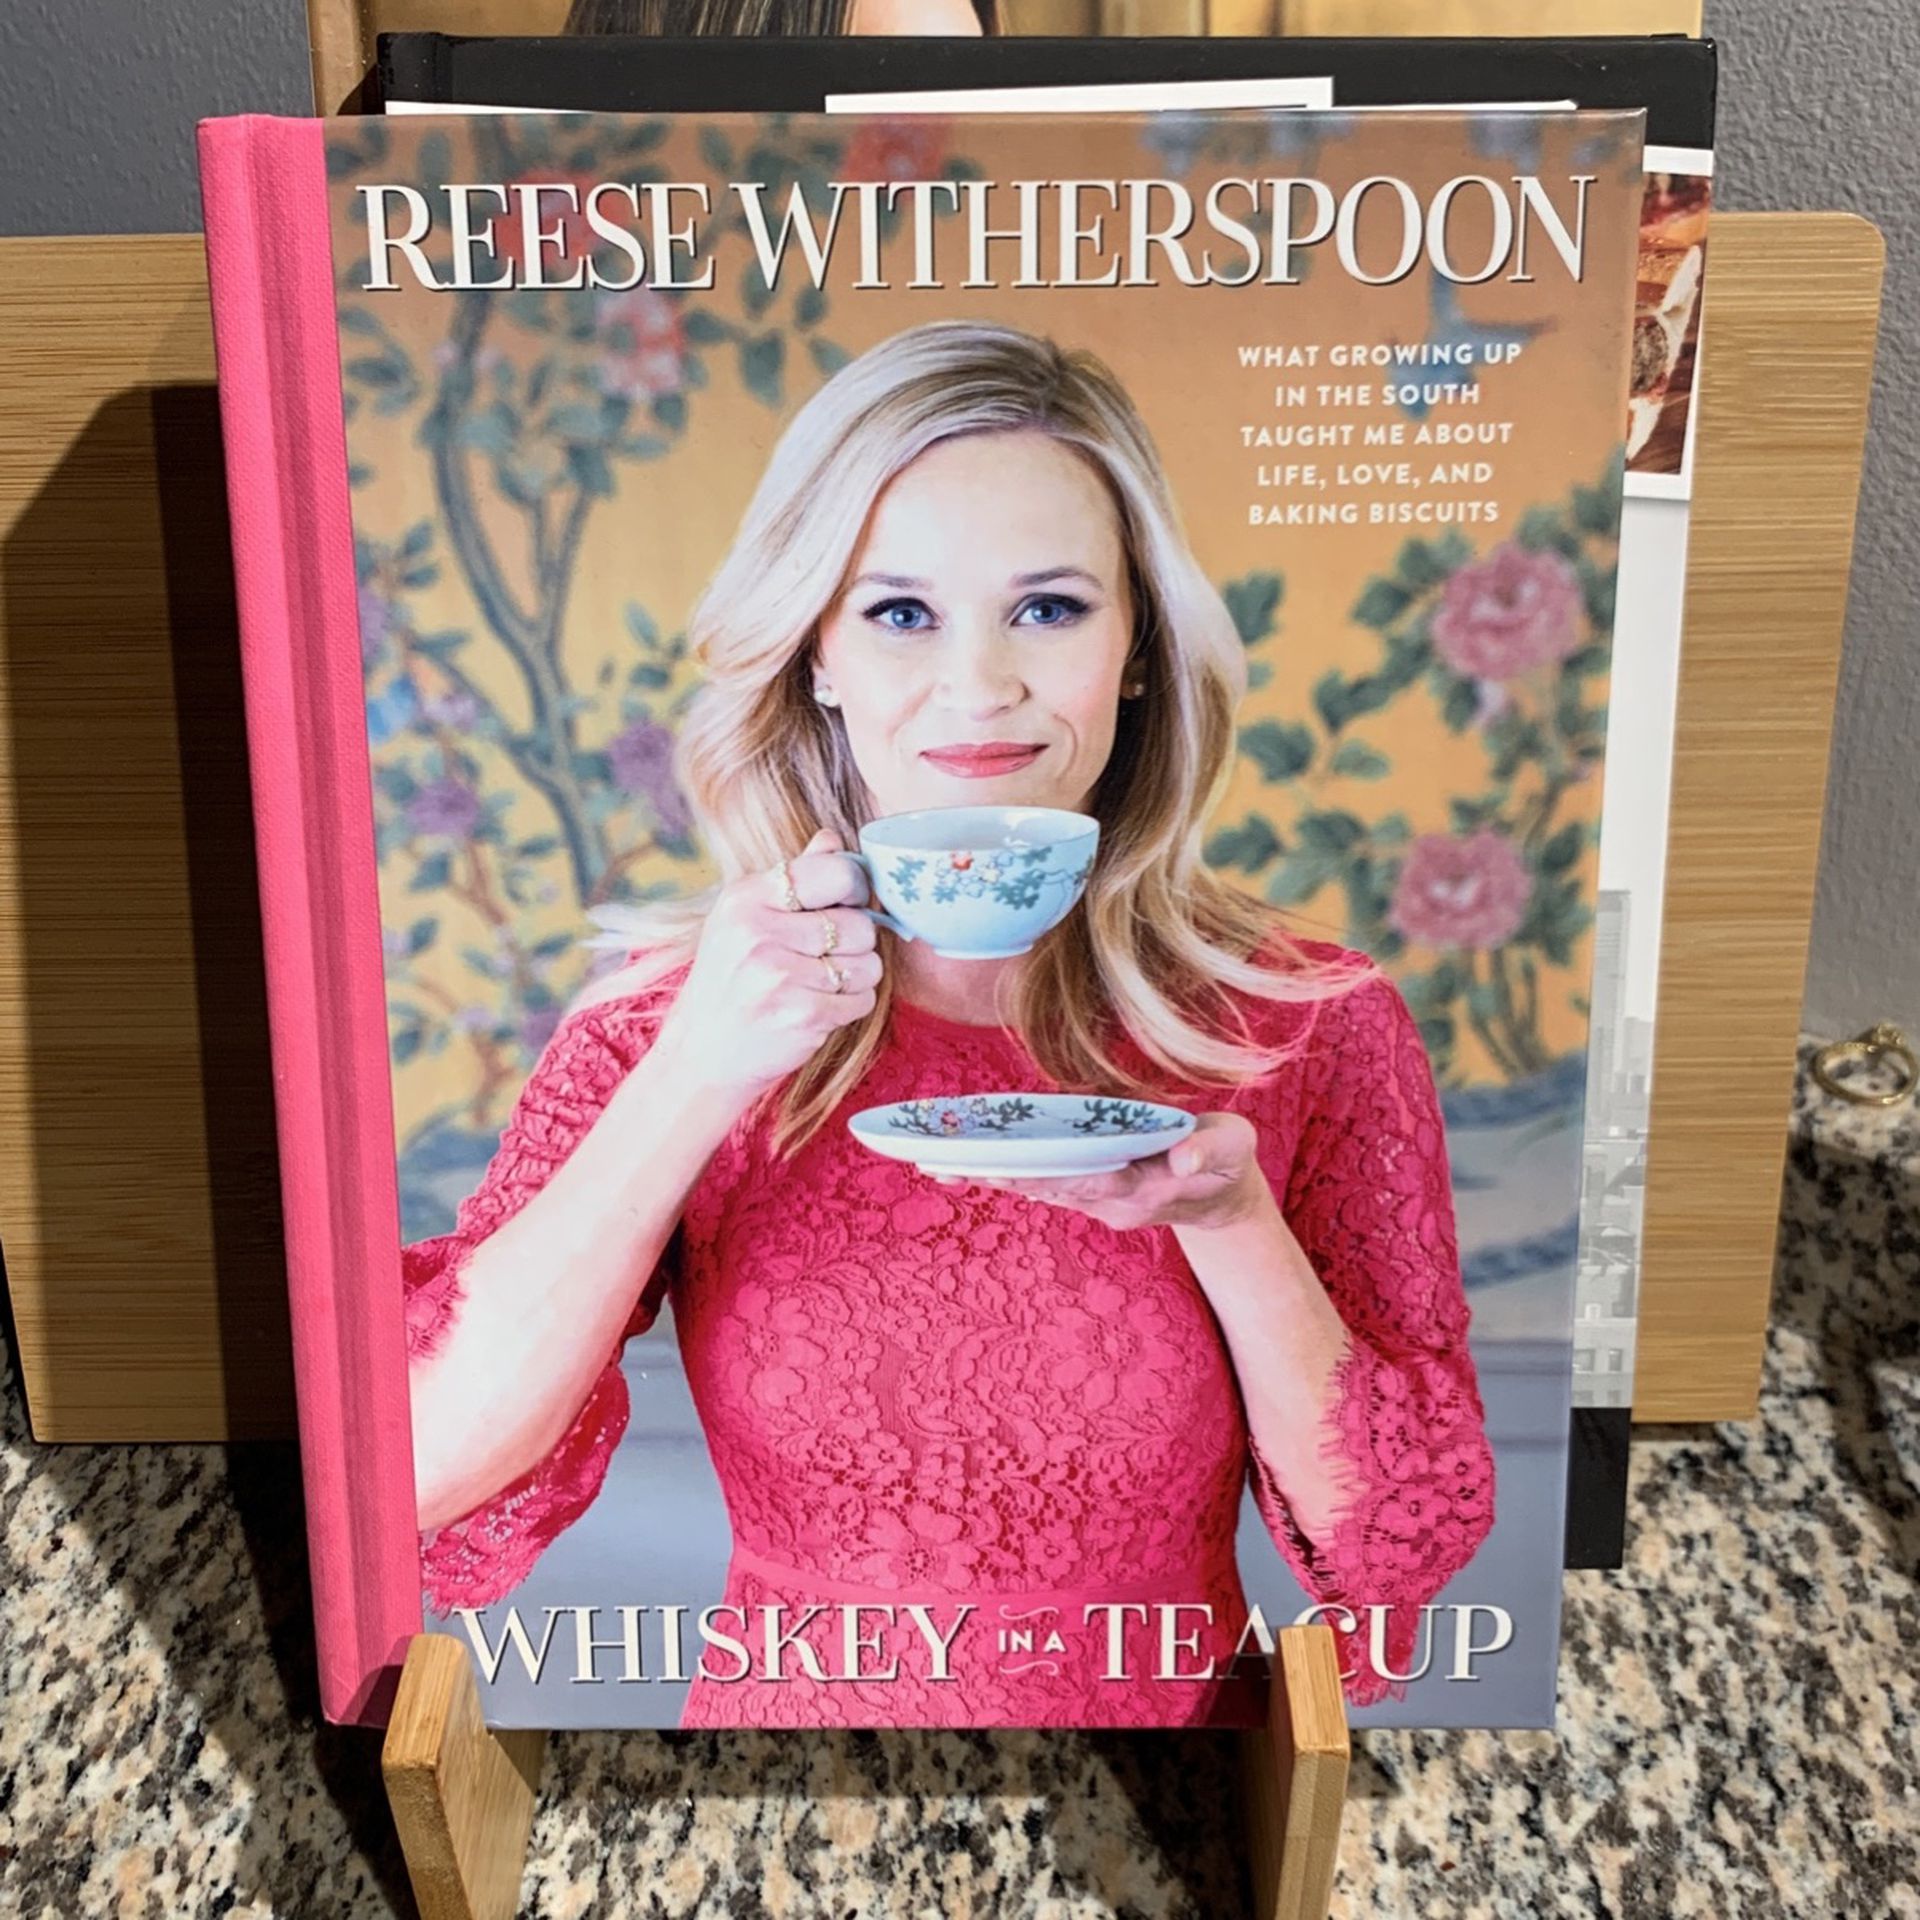 Whiskey in a Teacup - Reese Witherspoon Cook Book